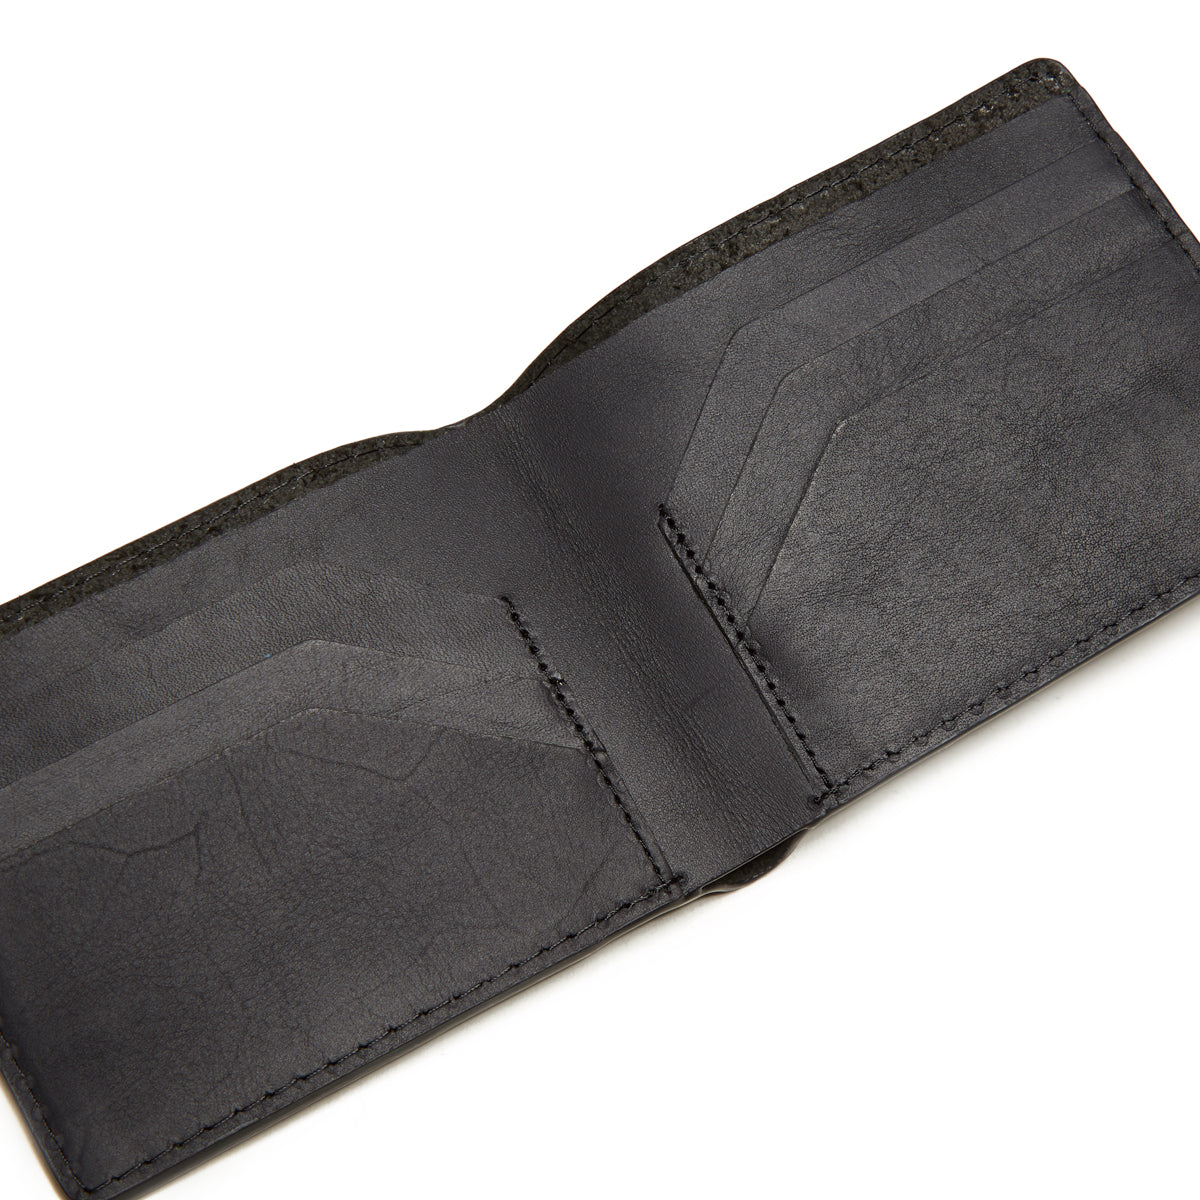 Brixton Traditional Leather Wallet - Black image 2